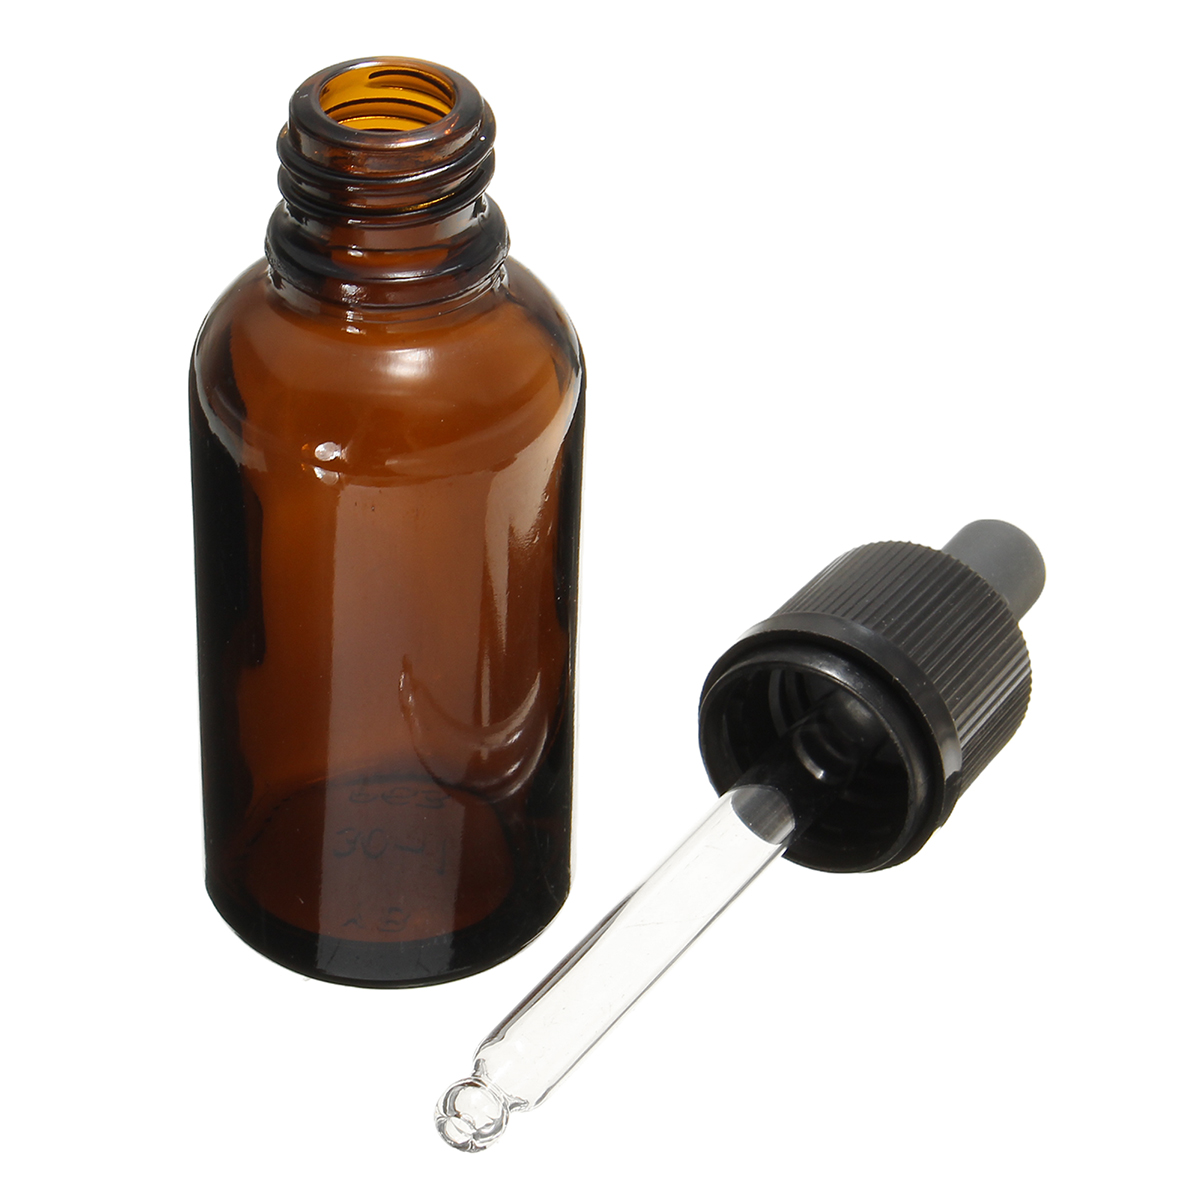 30ml-Empty-Essential-Oil-Refillable-Bottles-Amber-Glass-Dropper-Travel-Vials-Makeup-Skin-Care-Tools-1140063